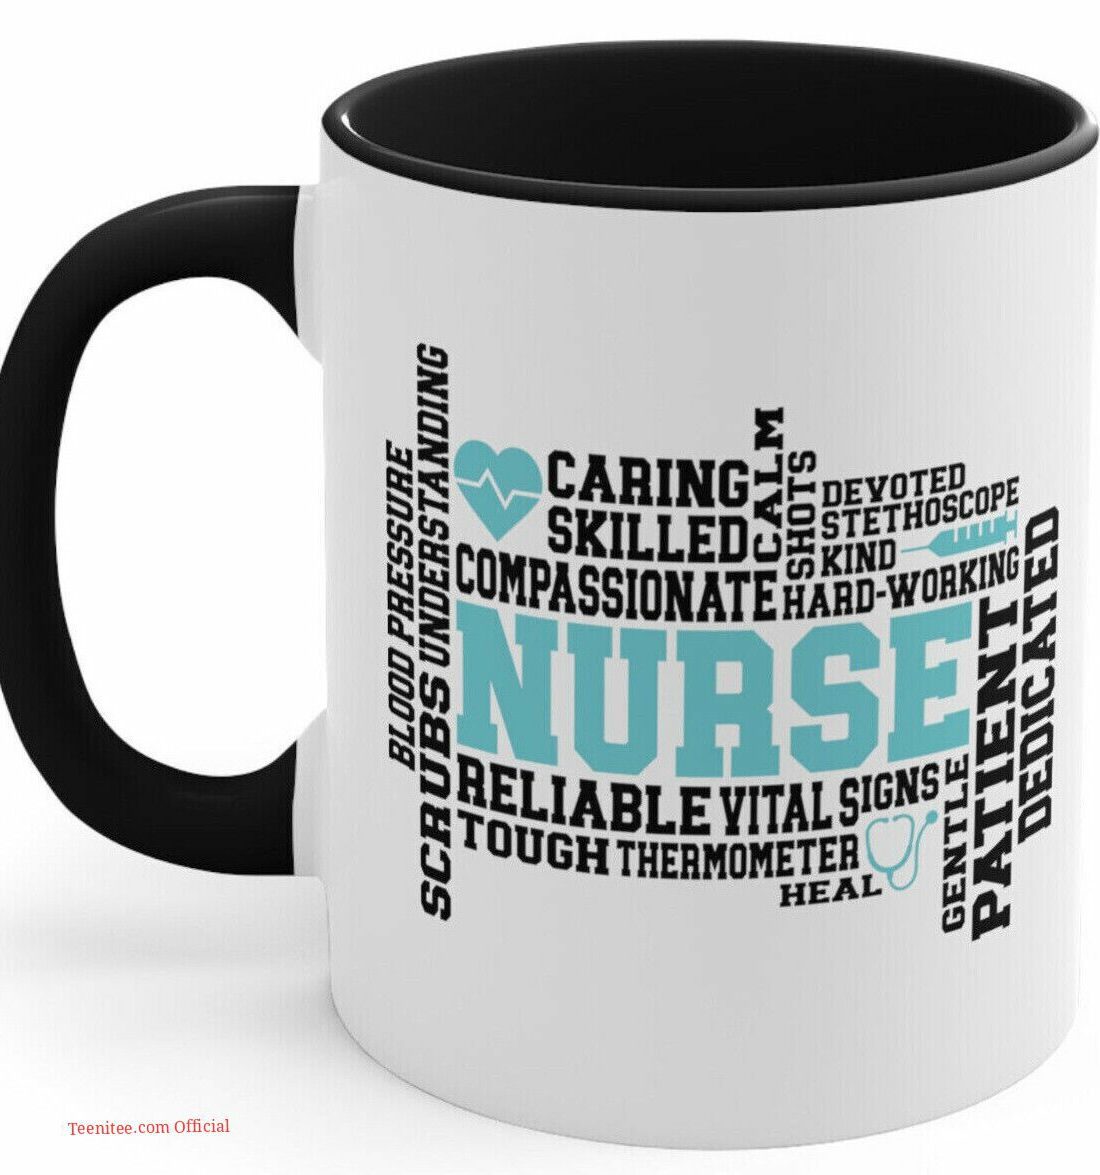 Virtues of nurse| best gift mug for mom and daughter - 15 oz